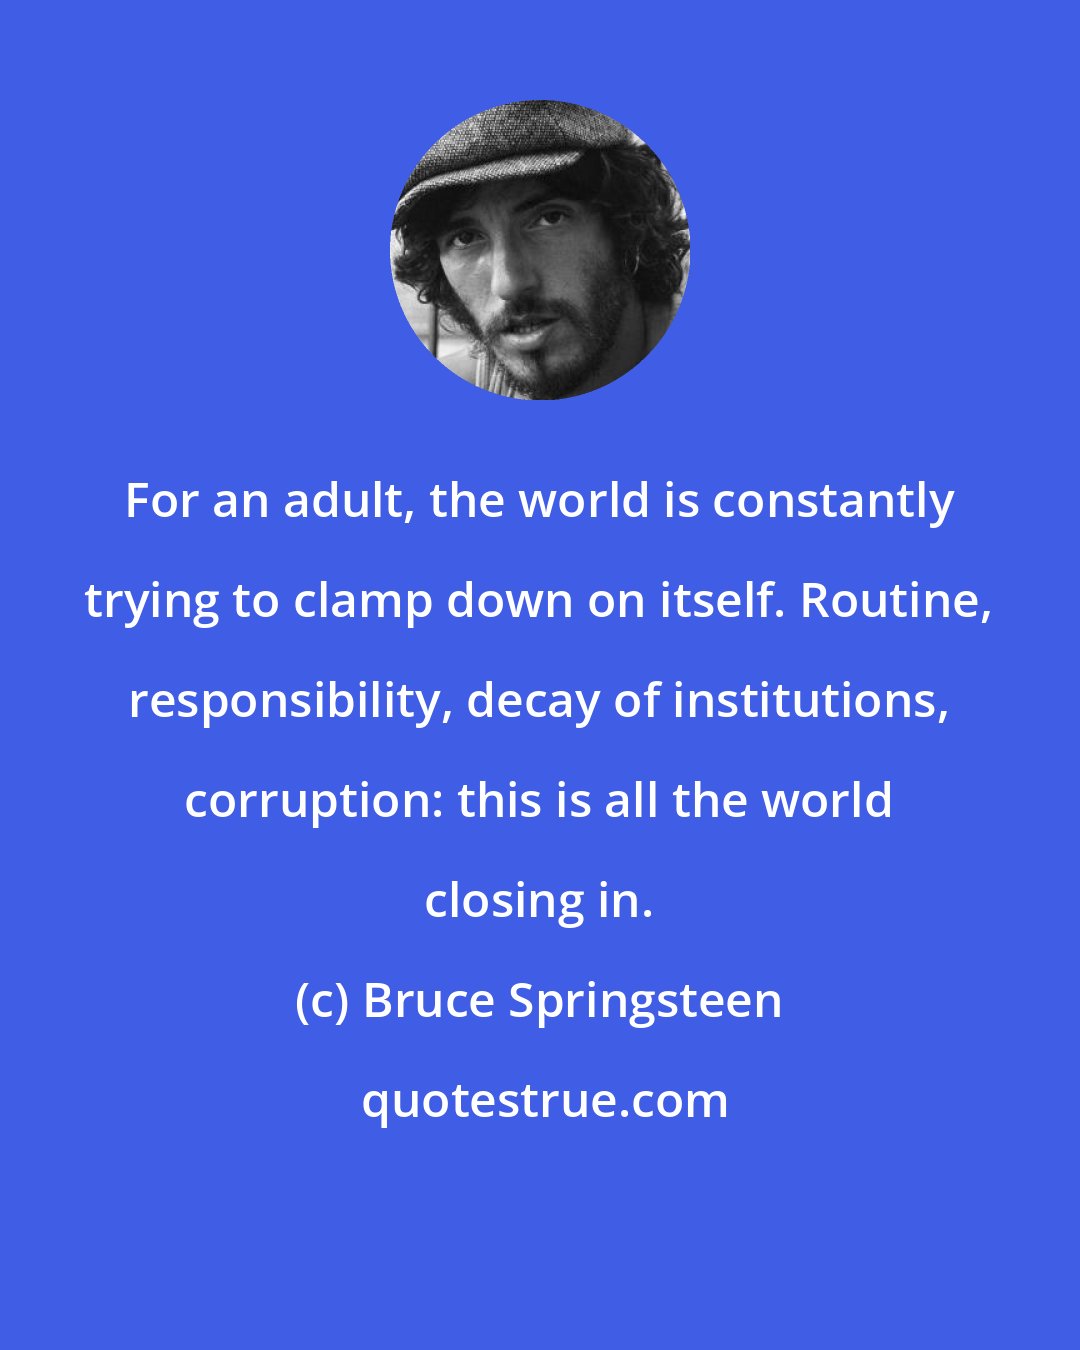 Bruce Springsteen: For an adult, the world is constantly trying to clamp down on itself. Routine, responsibility, decay of institutions, corruption: this is all the world closing in.